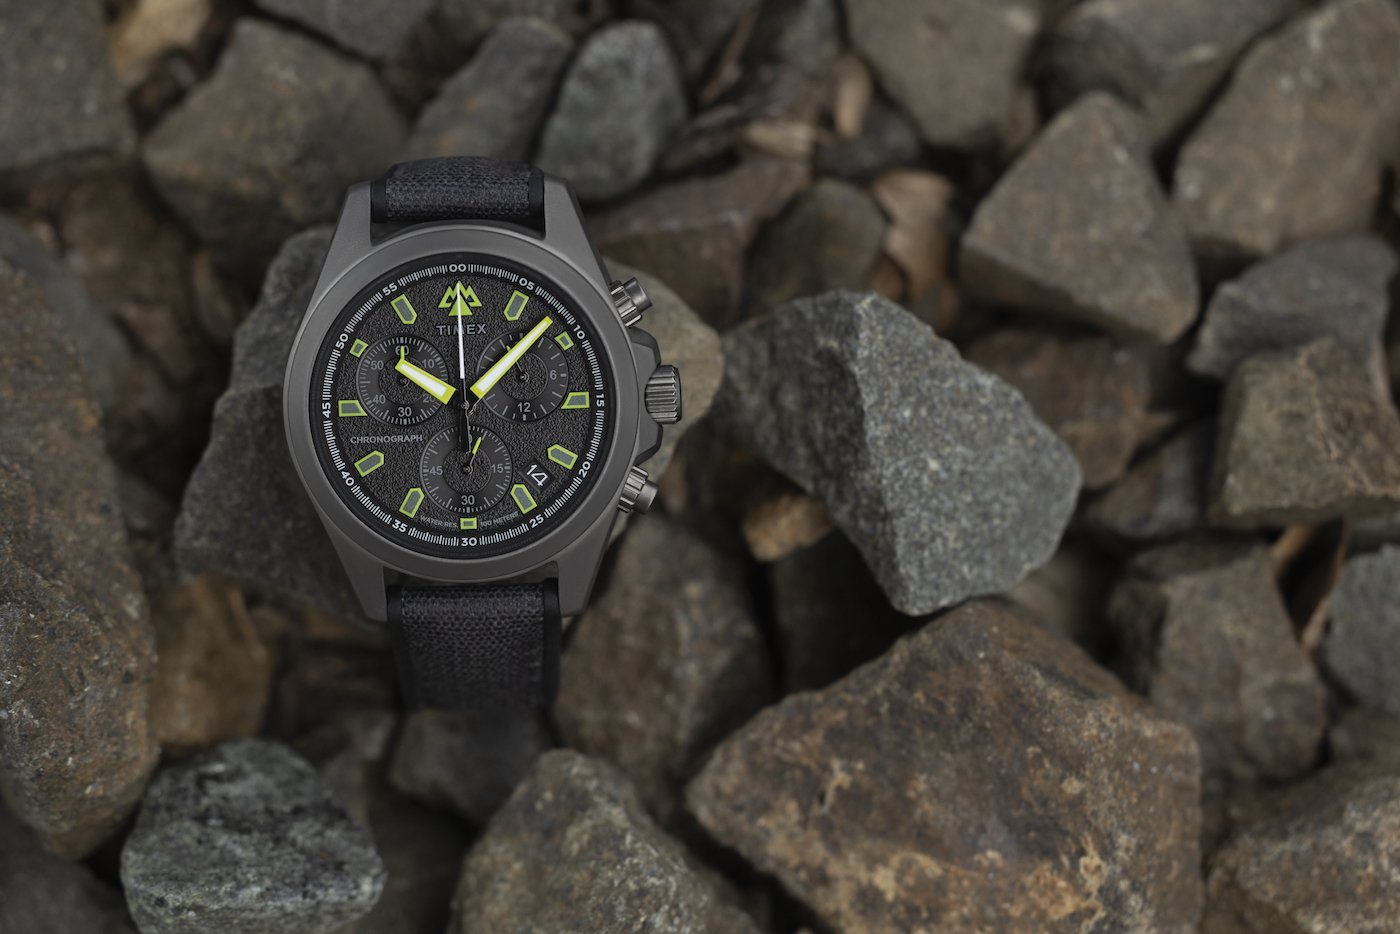 Timex Group: towards the 170th anniversary 